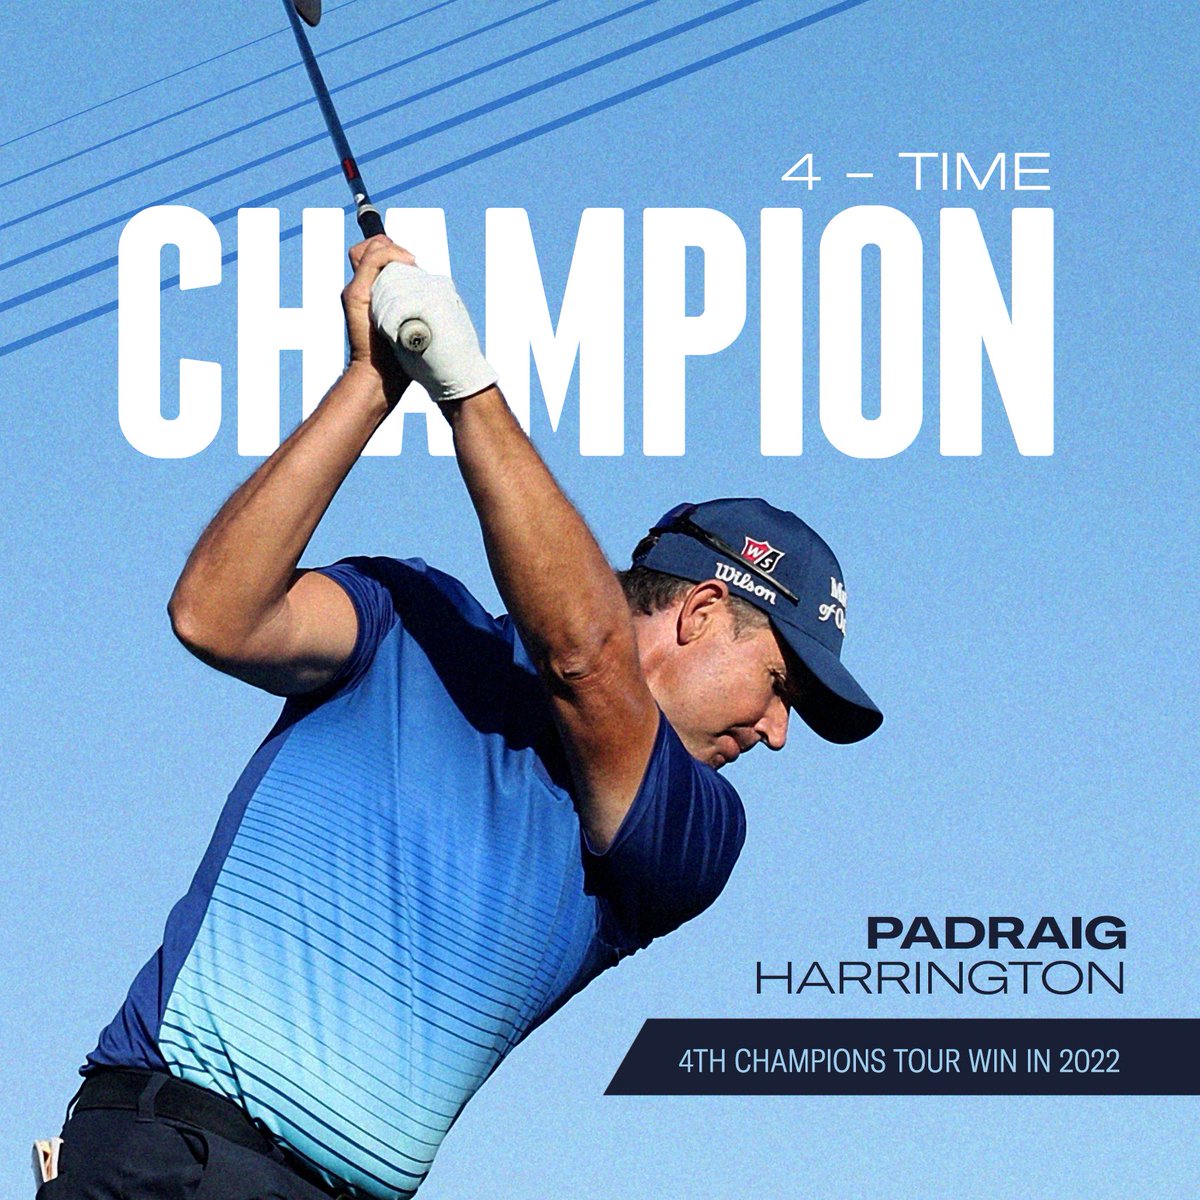 🏆🏆🏆🏆 Breaking records and adding another one to the trophy cabinet. Congratulations @padraig_h on winning the Charles Schwab Cup Championship season finale while setting the new 72-hole record at -27 under par and capping off your inaugural PGA Champions Season with 4 wins!